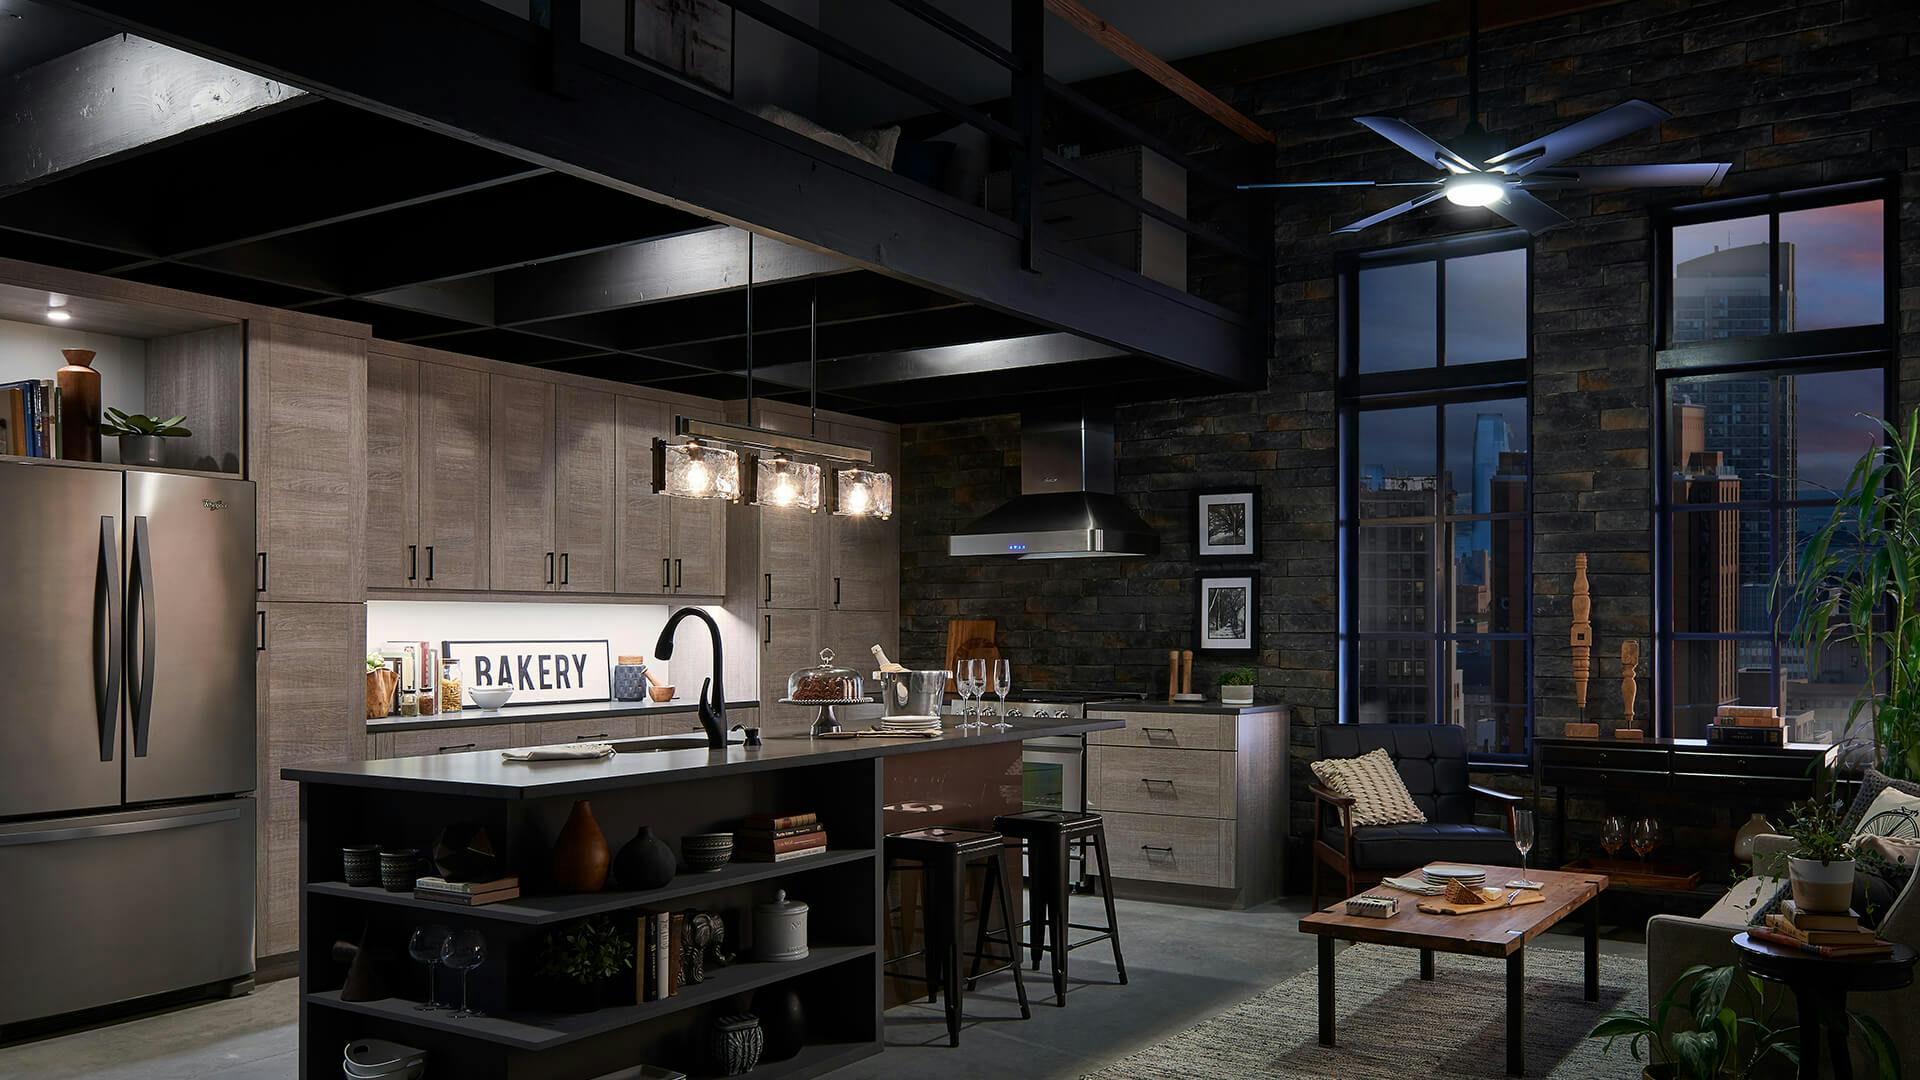 Evening urban kitchen with Aberdeen lights and Szeplo ceiling fan.